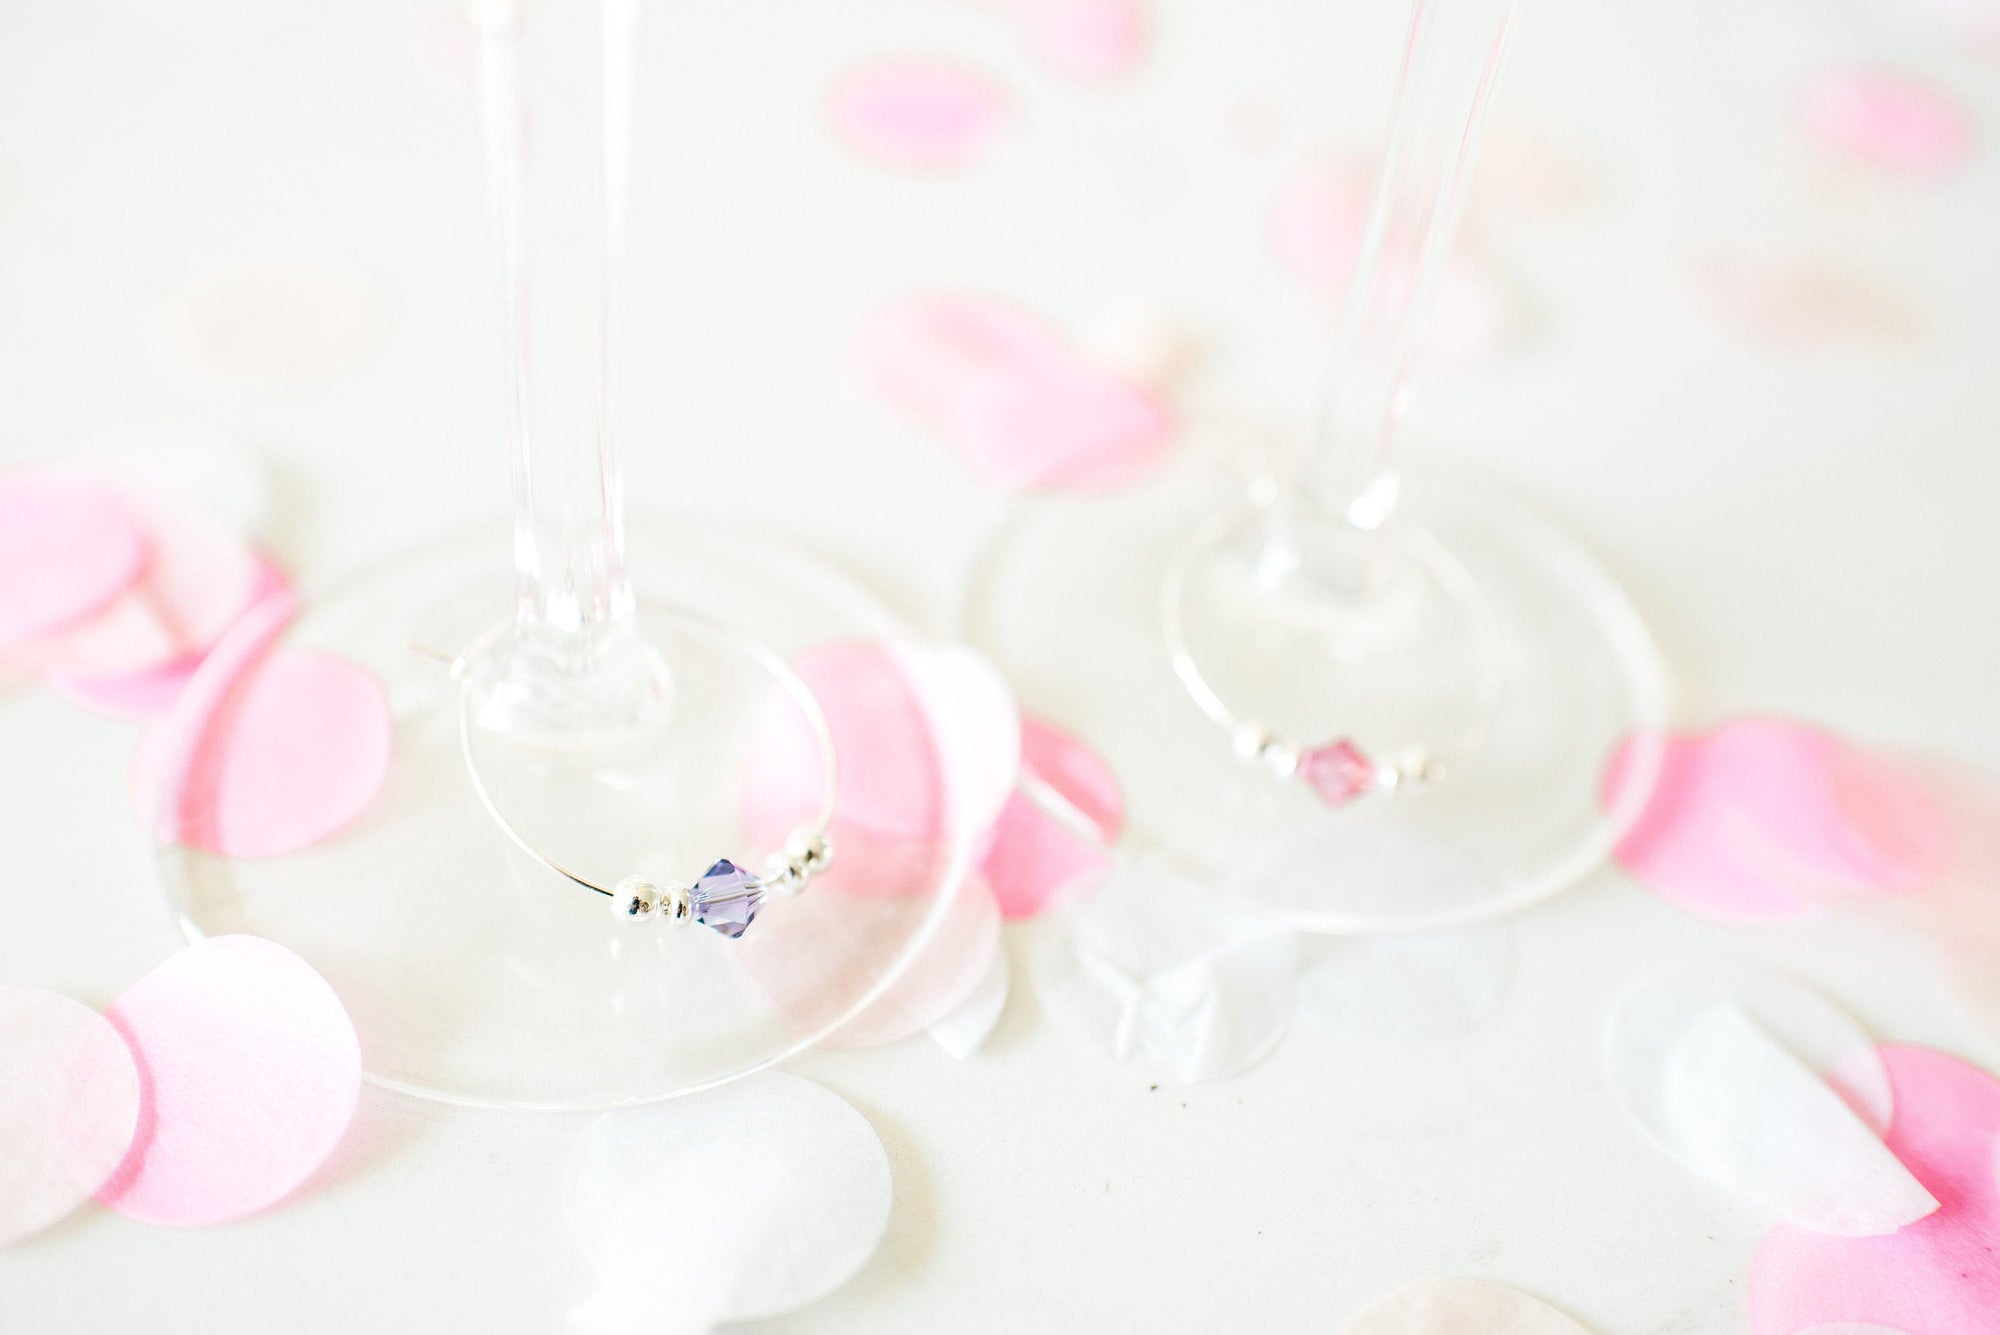 Destination Wedding Favors for Guests, Beach Wedding Favors Travel, Tropical Wedding Party Favors for Adults, Swarovski Crystal Wine Charms - @PlumPolkaDot 